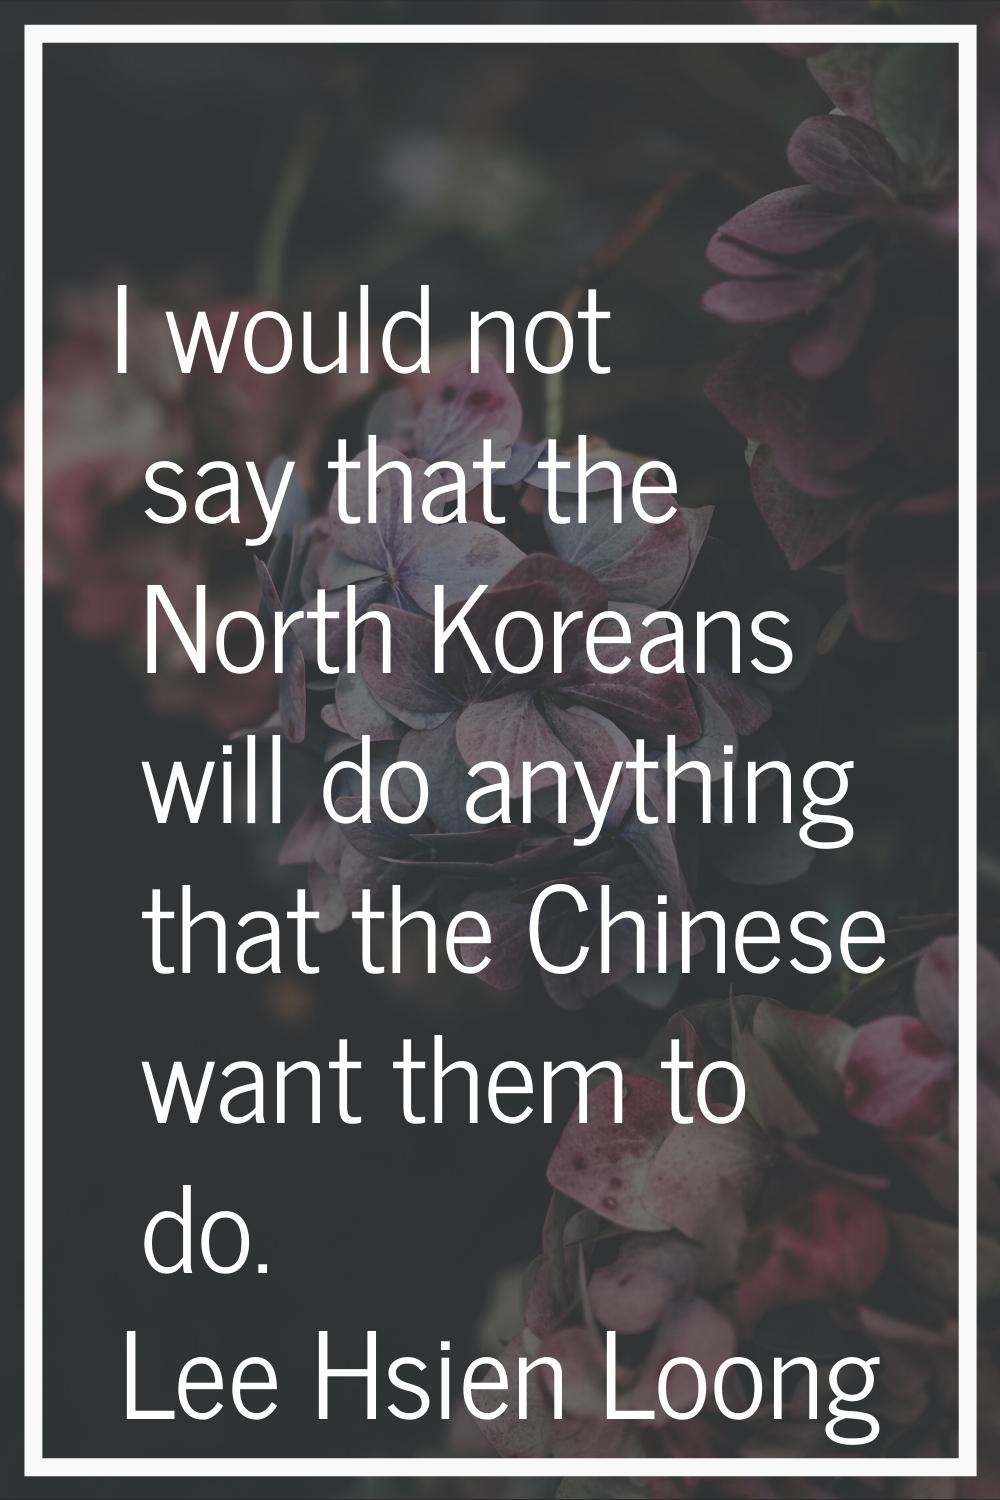 I would not say that the North Koreans will do anything that the Chinese want them to do.